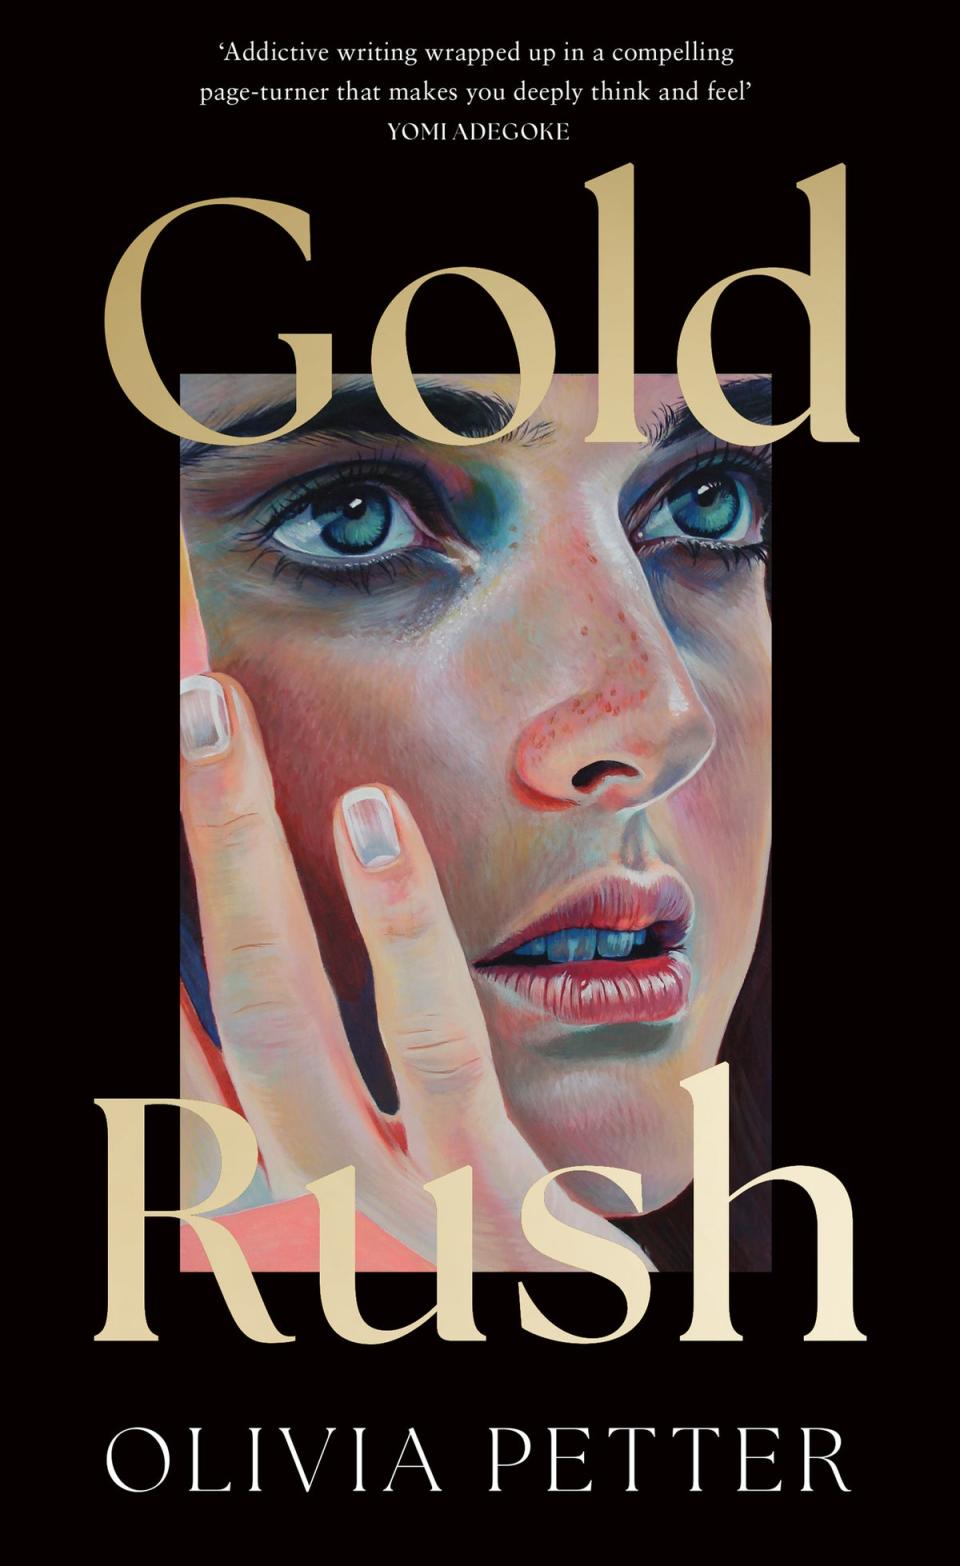 Gold Rush by Olivia Petter is published by 4th Estate, out on the July 18. (Harper Collins)